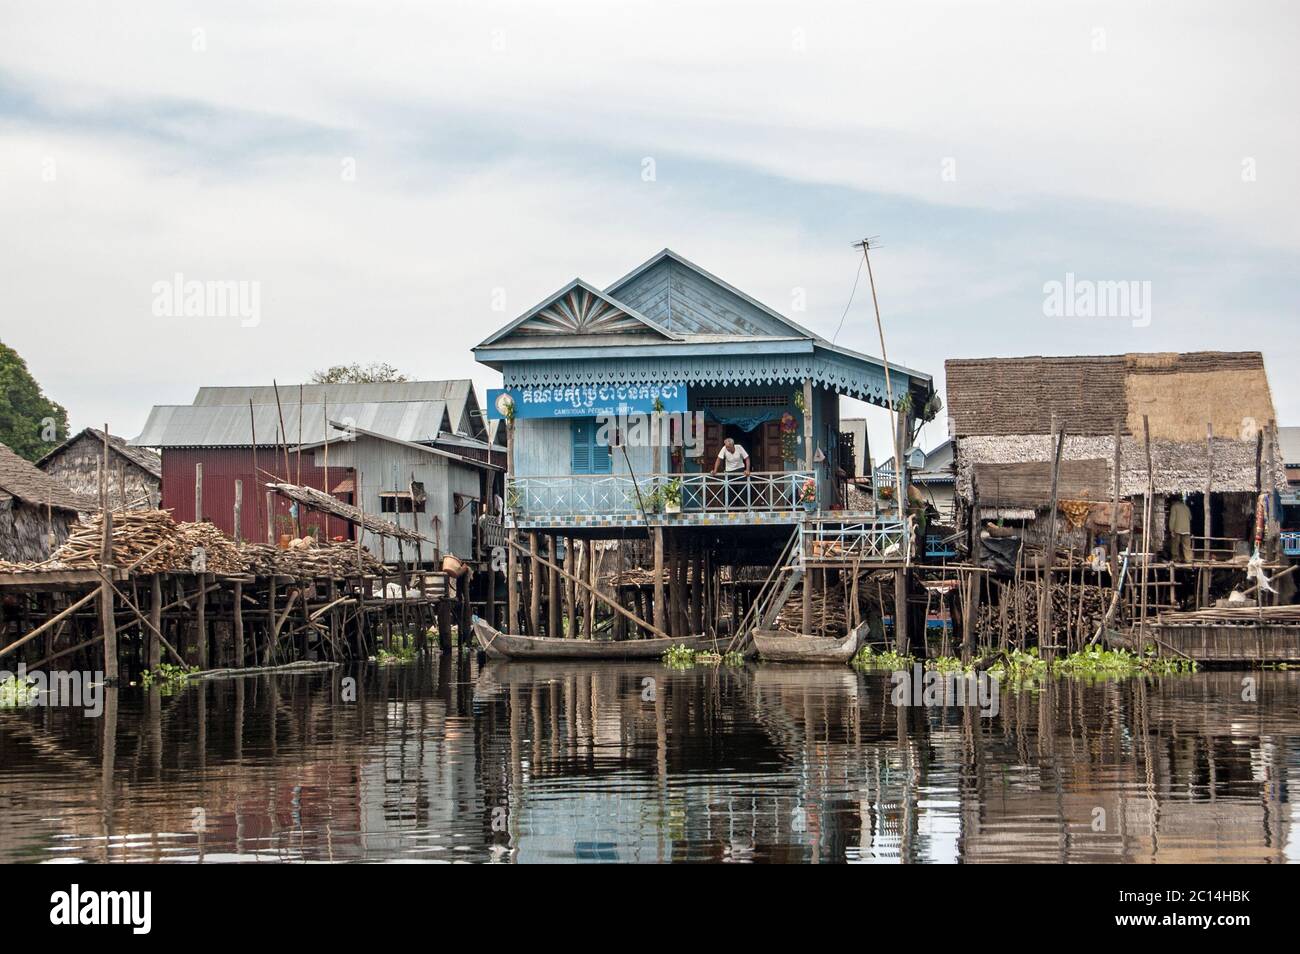 Kampong Phluk, Cambodia - December 4, 2011:  A man relaxing on the terrace of the Cambodian People's Party offices built on stilts in the floating vil Stock Photo